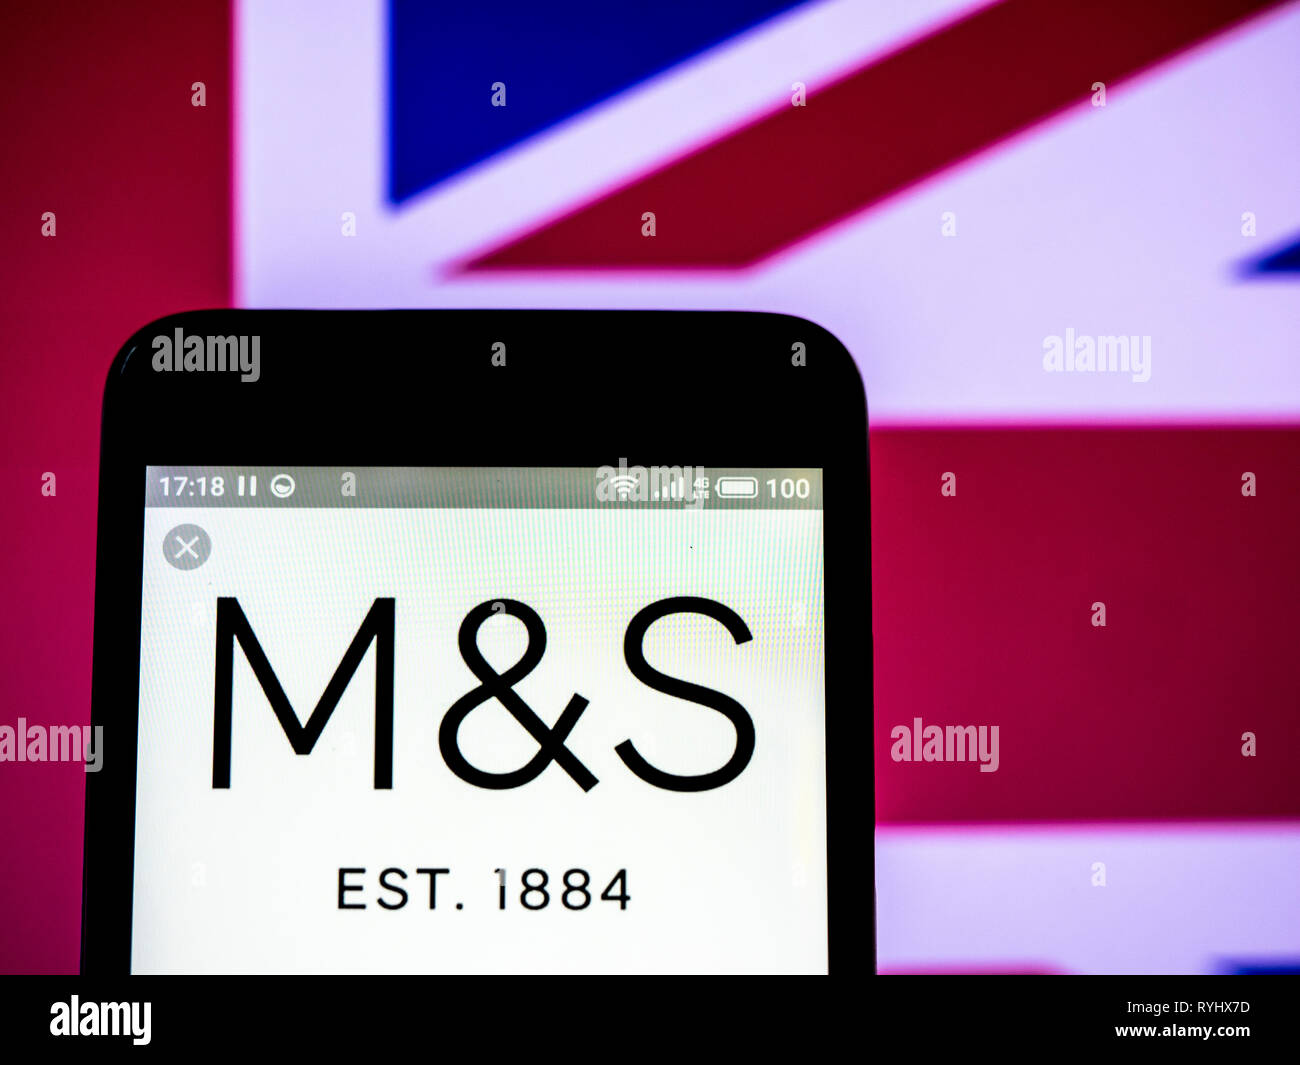 Marks & Spencer Group plc company logo seen displayed on smart phone. Stock Photo